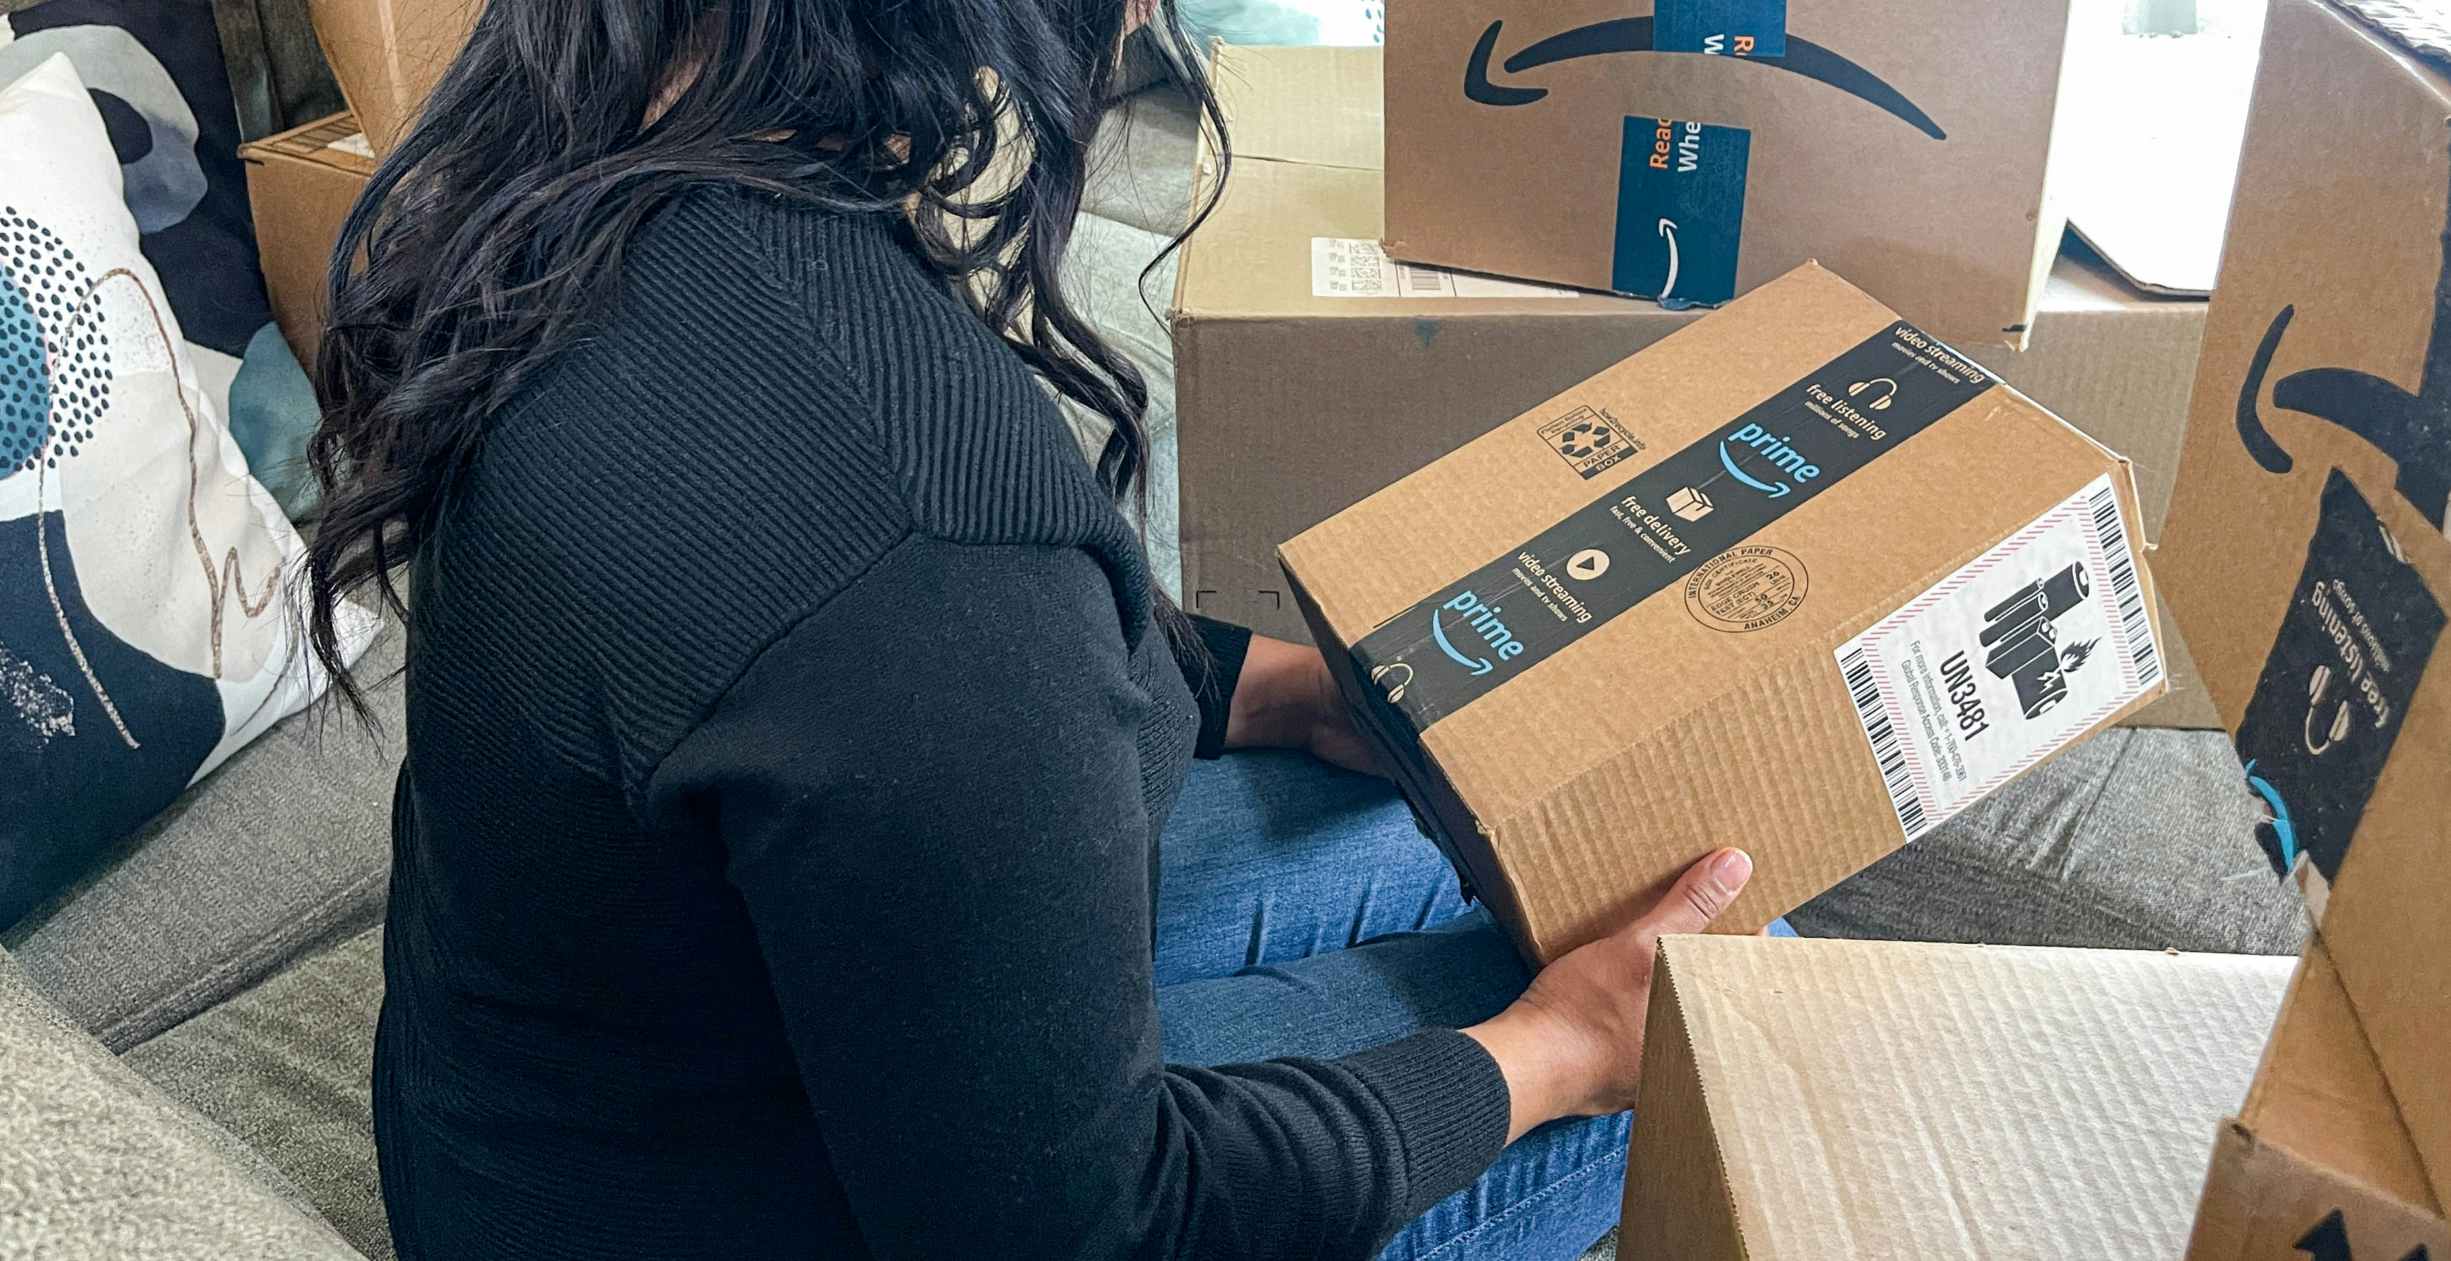 a person sitting on their couch holding an amazon box